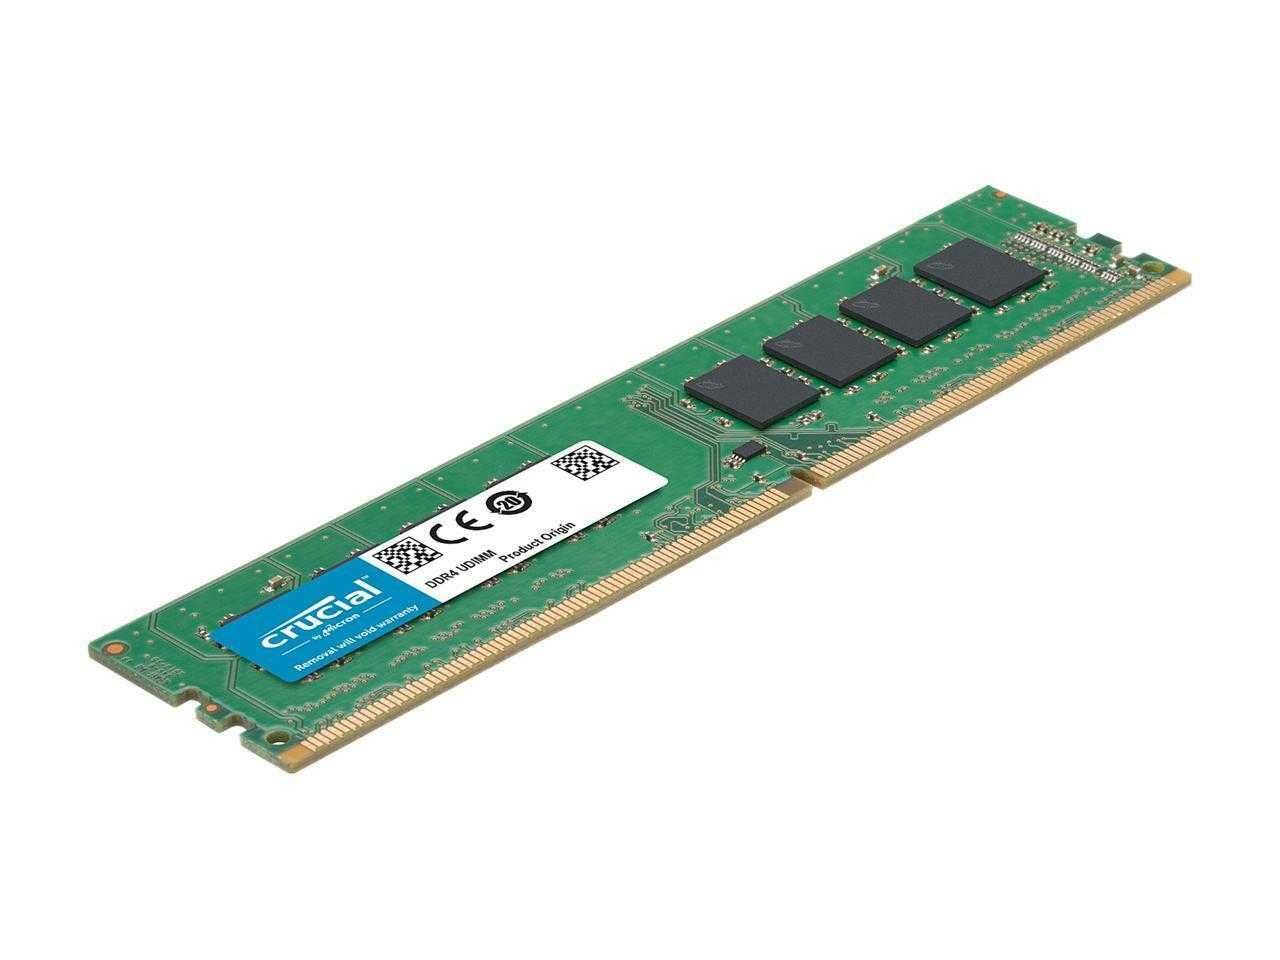 Сrucial ddr4 8gb 2666mhz 2ШТ (16ГБ)